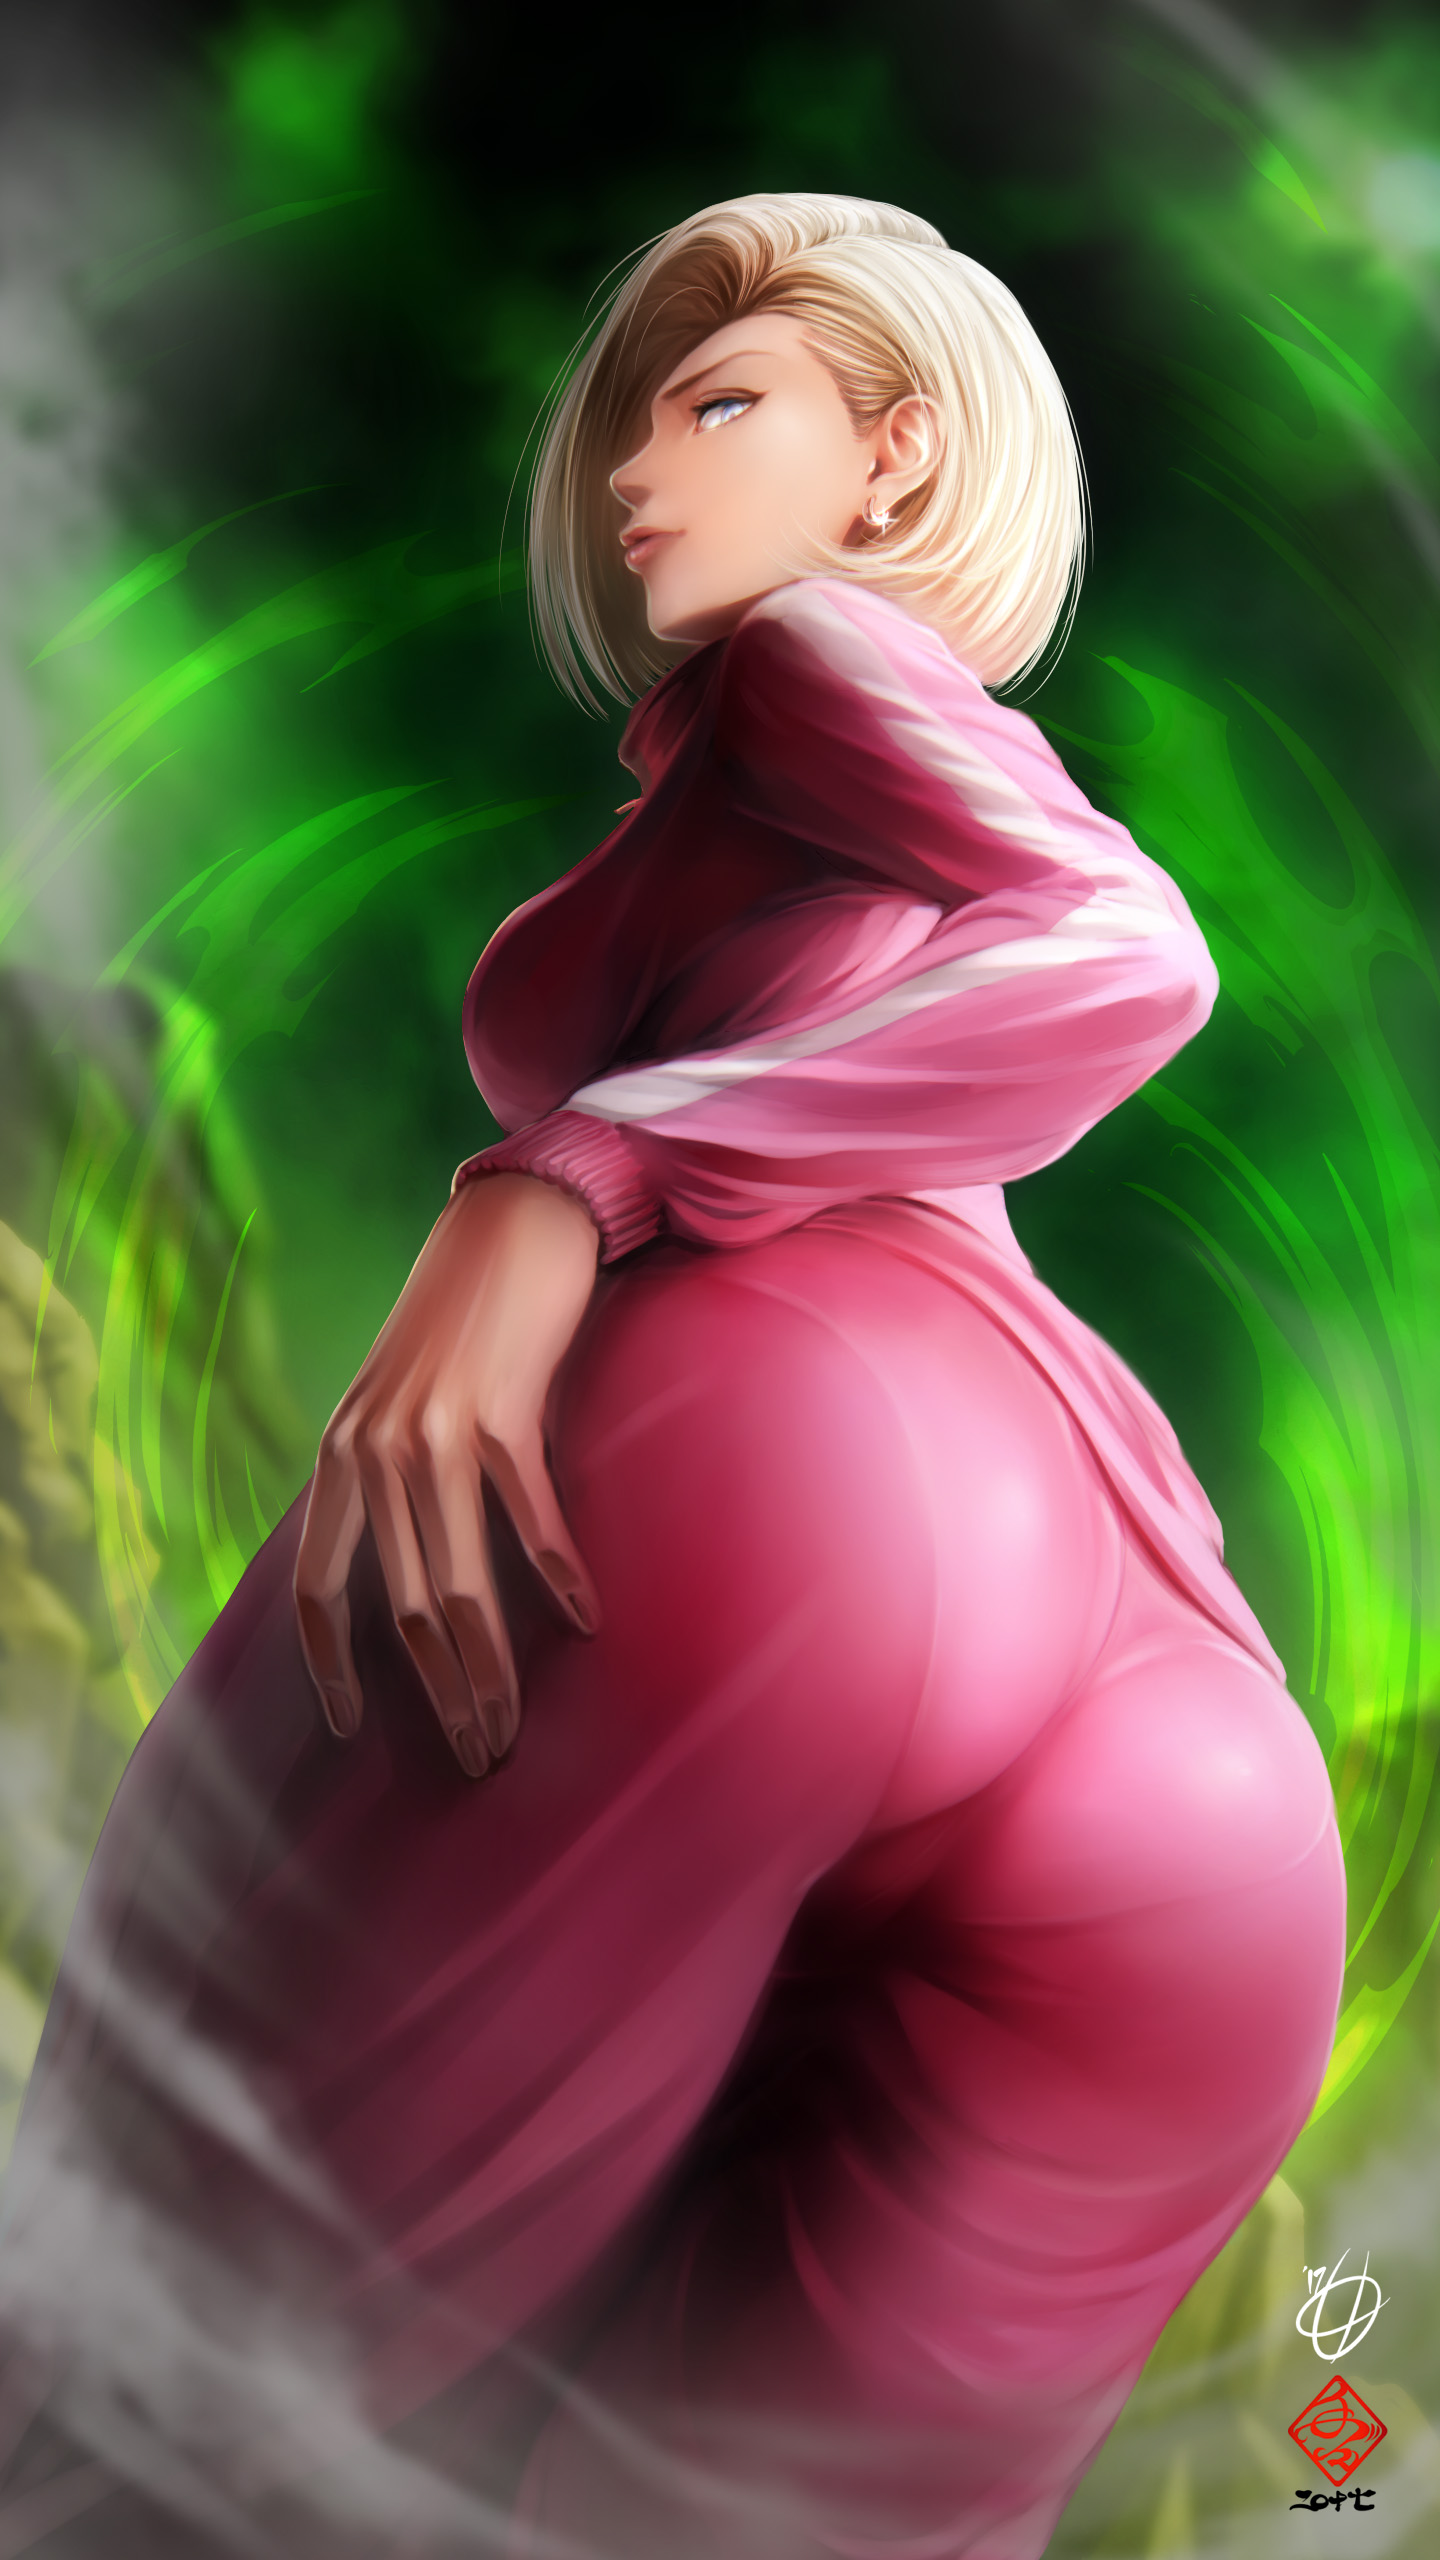 Android 18 tracksuit booty.jpg.